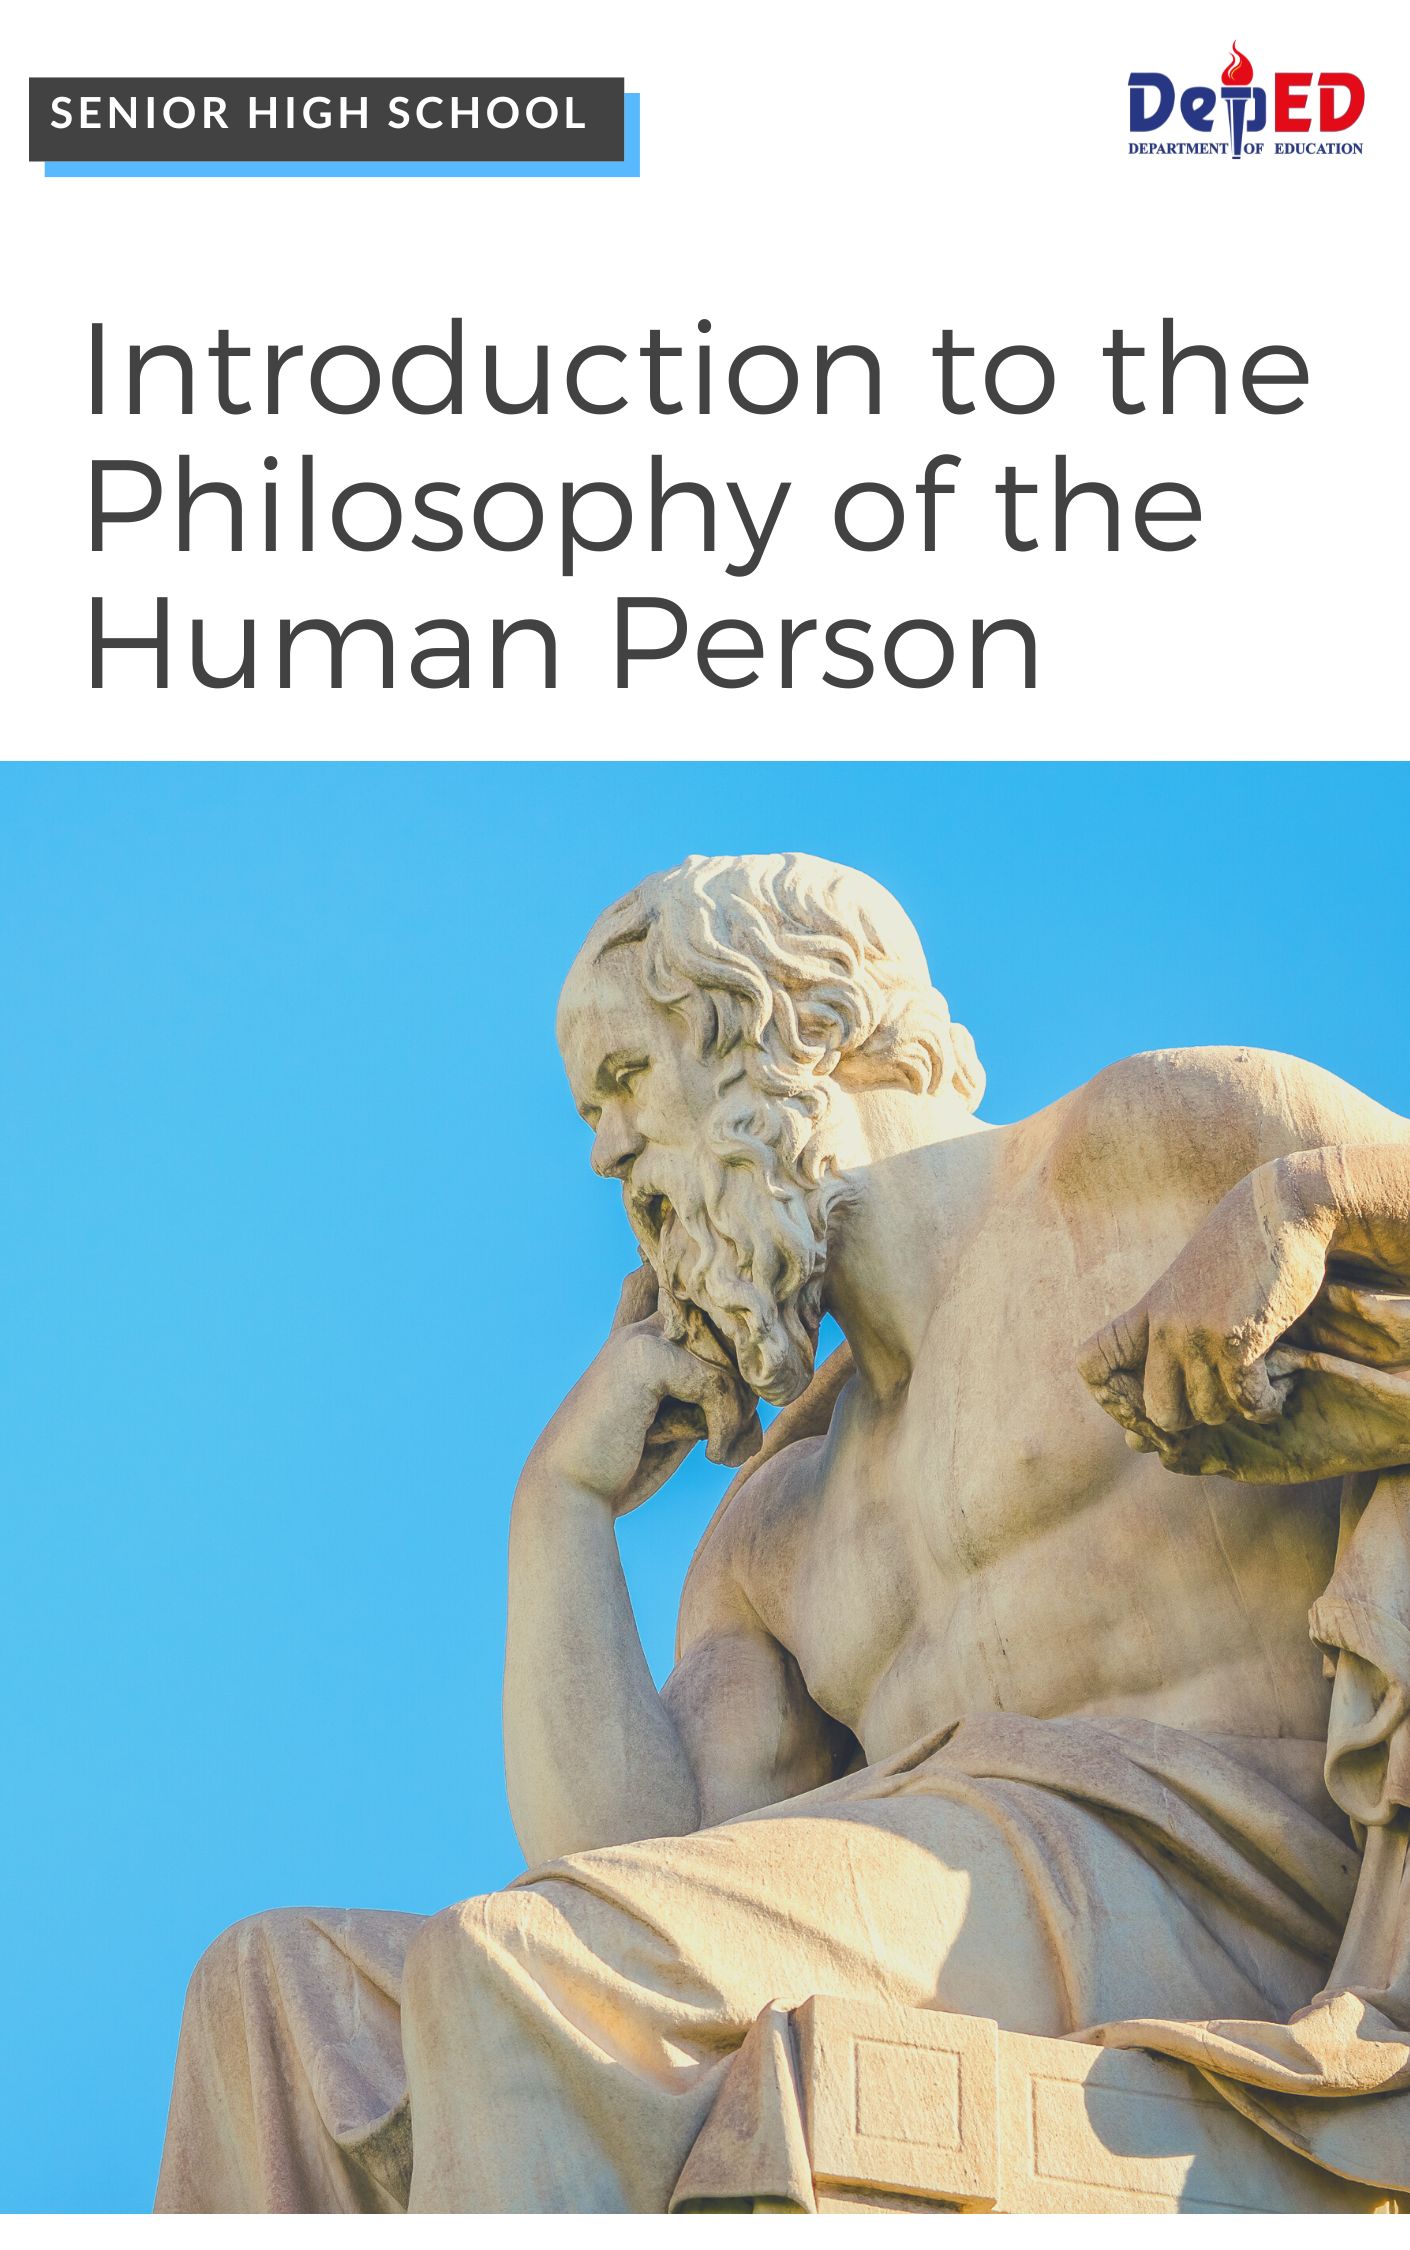 Introduction to the Philosophy of the Human Person